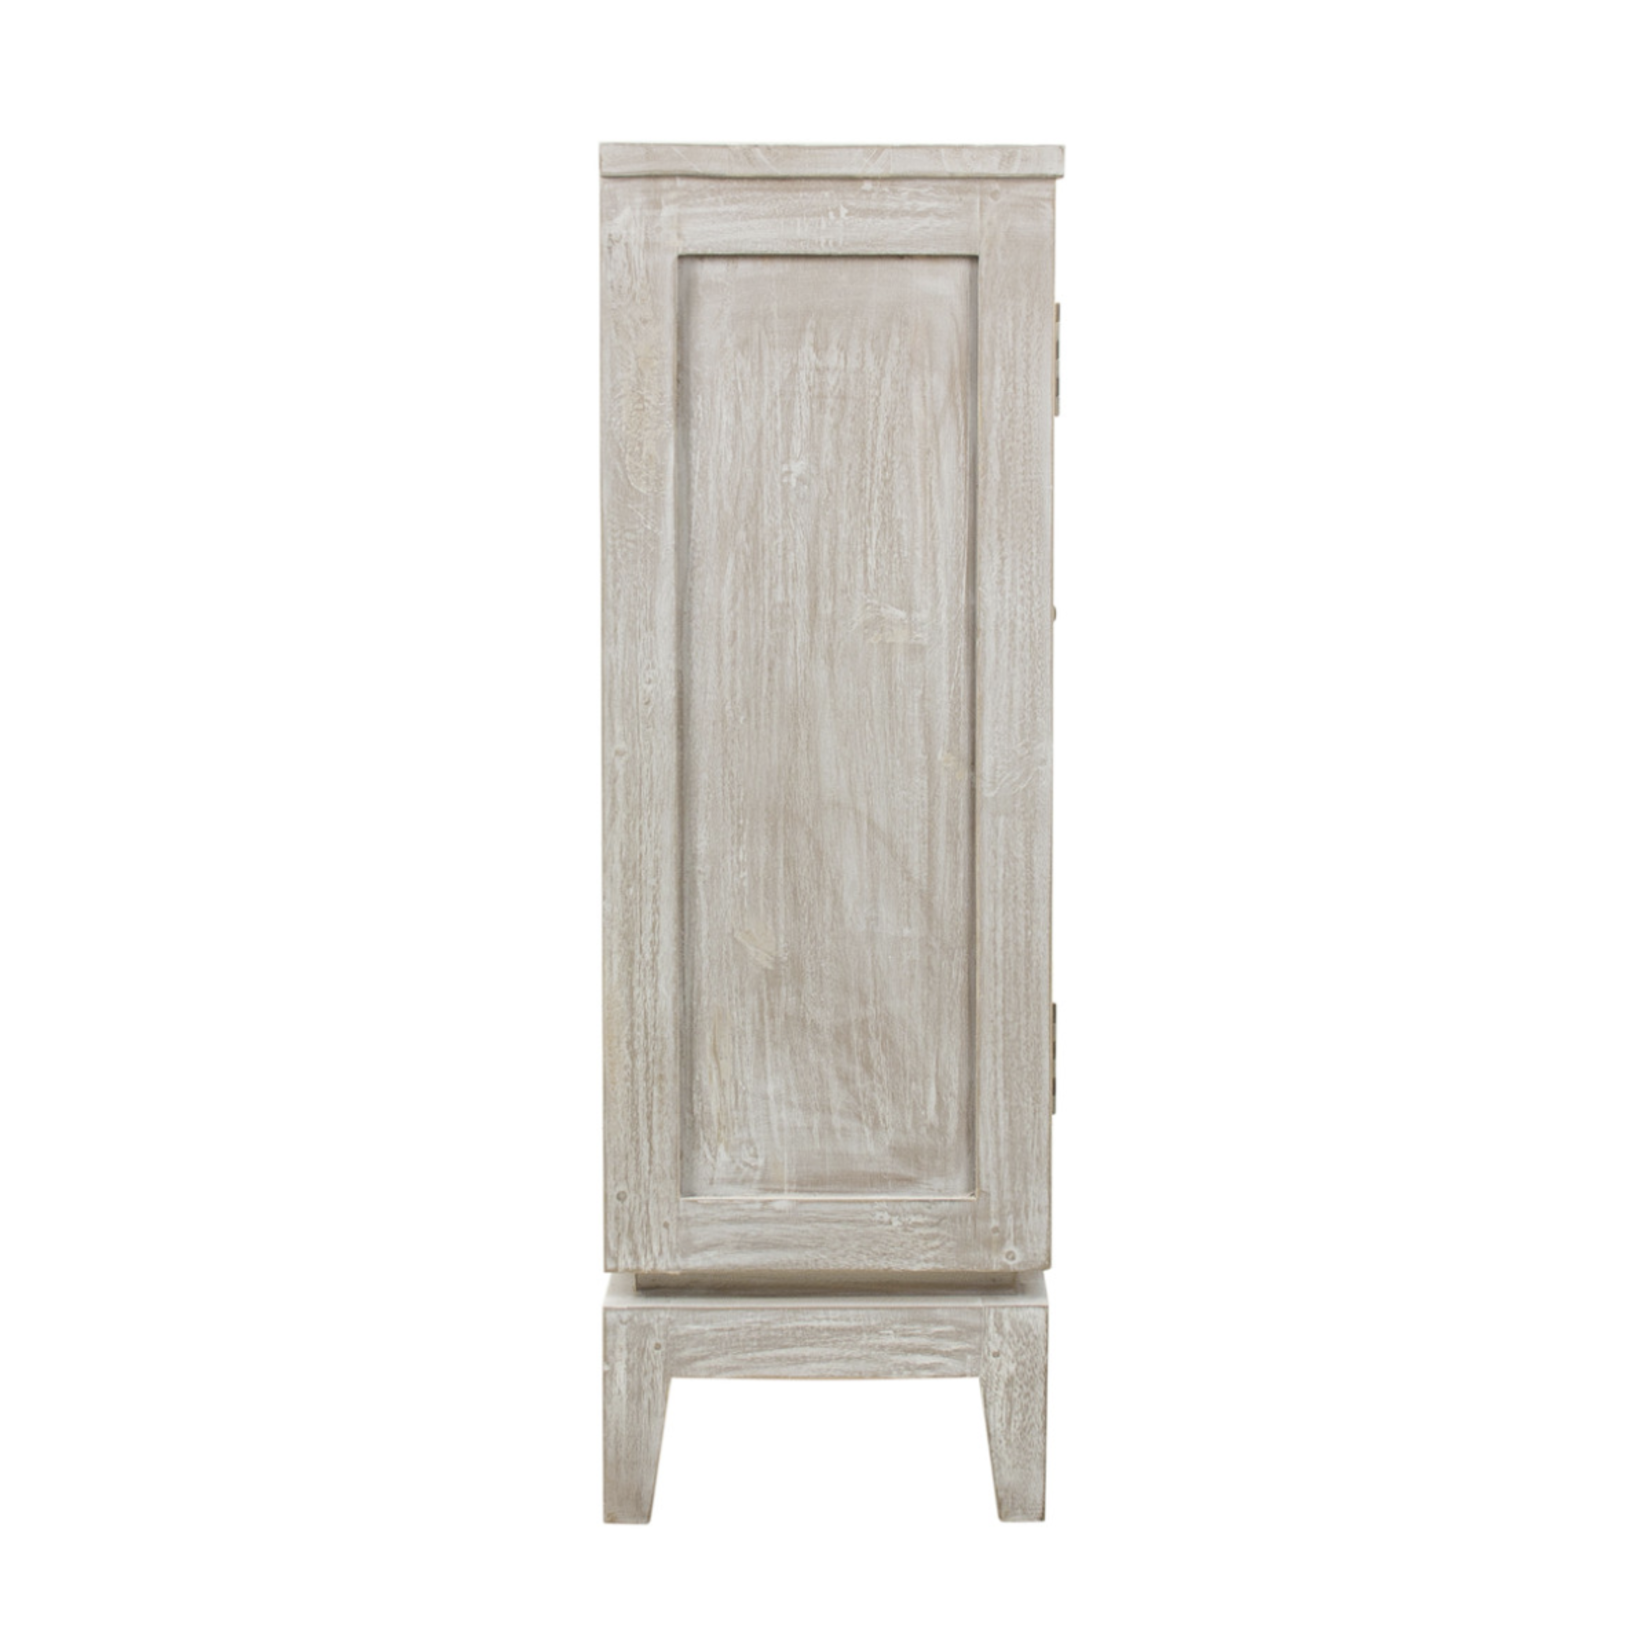 Outside The Box 40x11x36 Stacey White Washed Track 2 Door Cabinet Sideboard